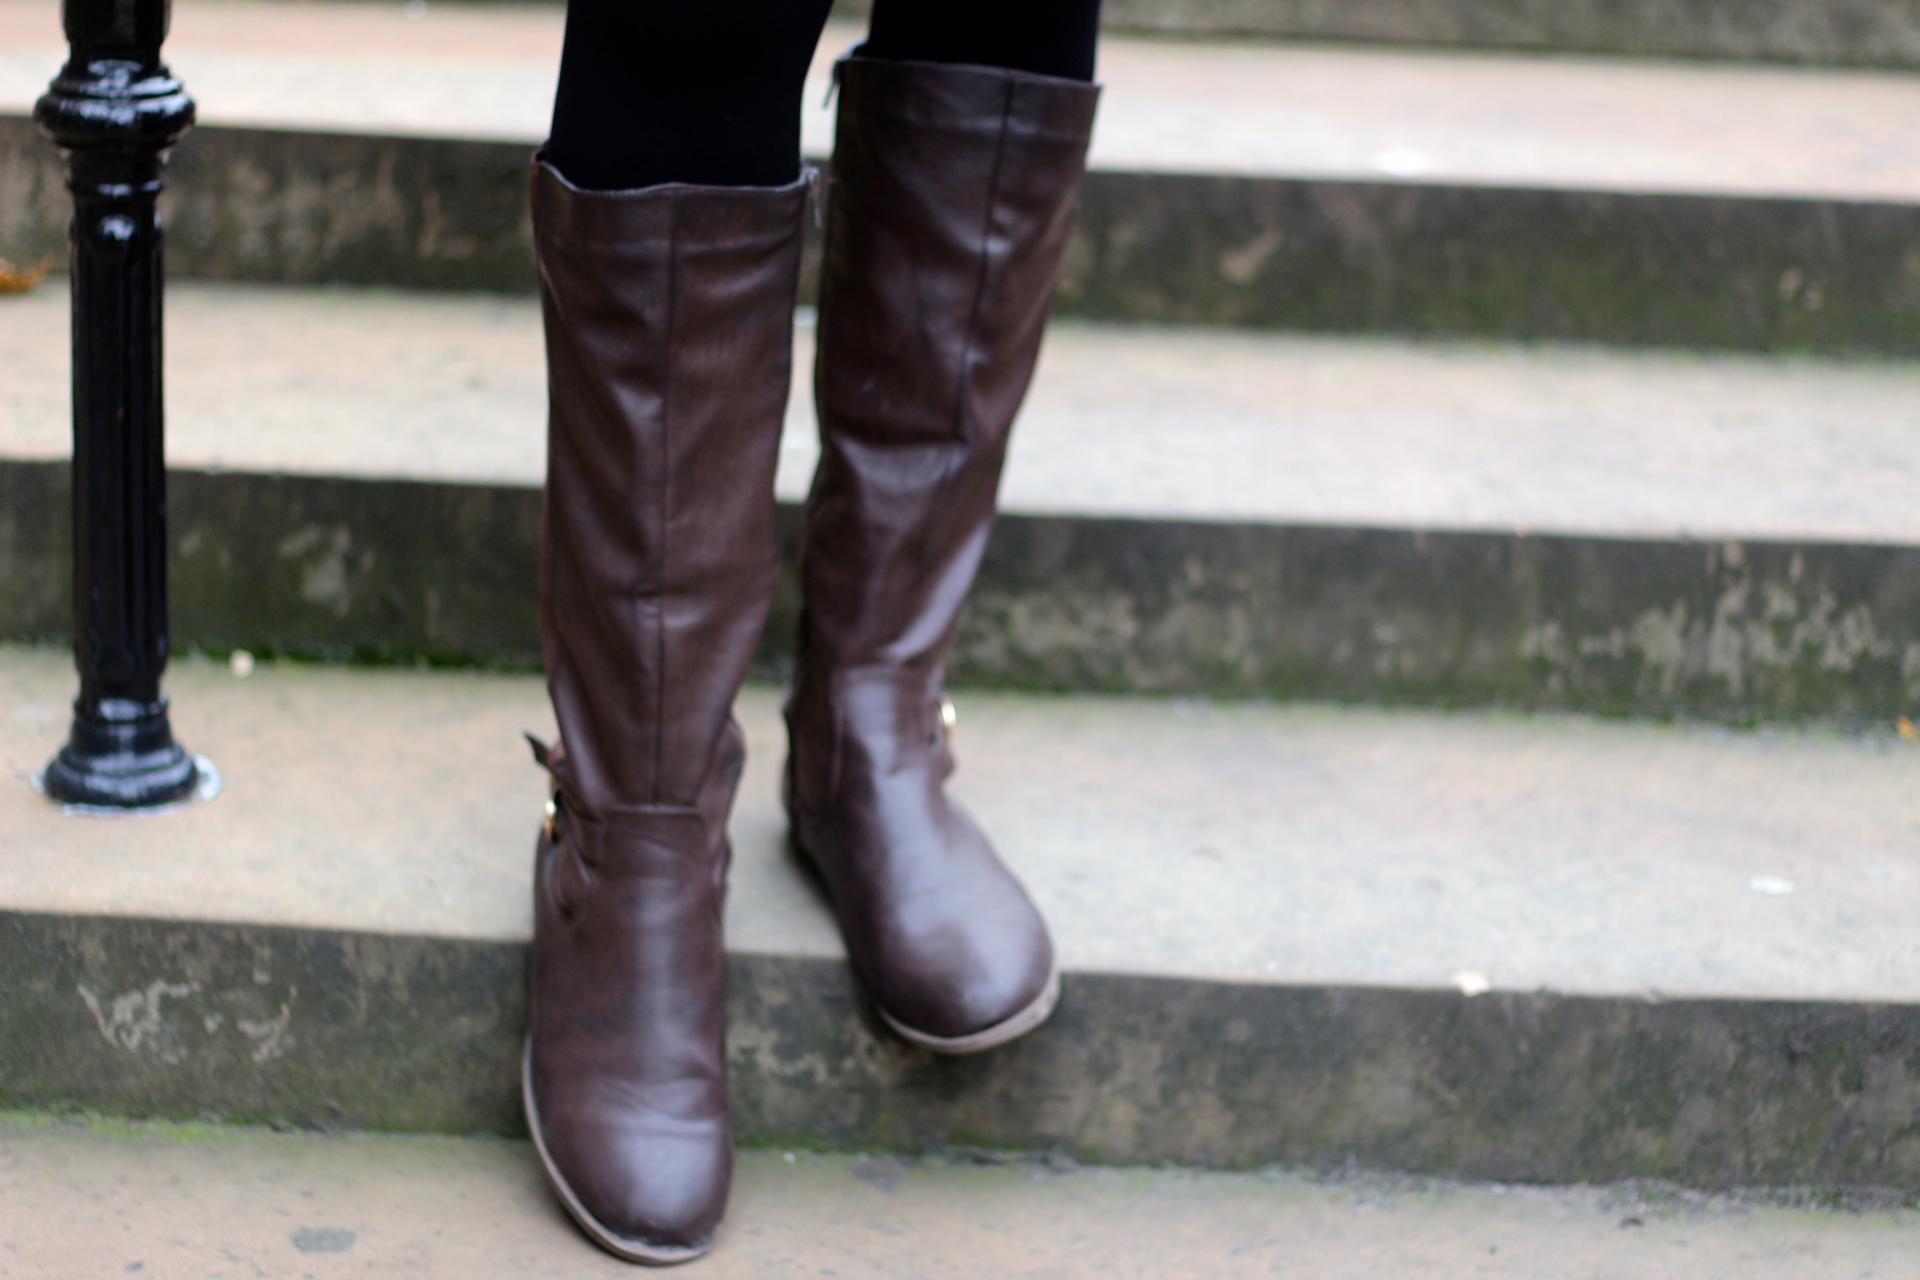 brown knee high boots